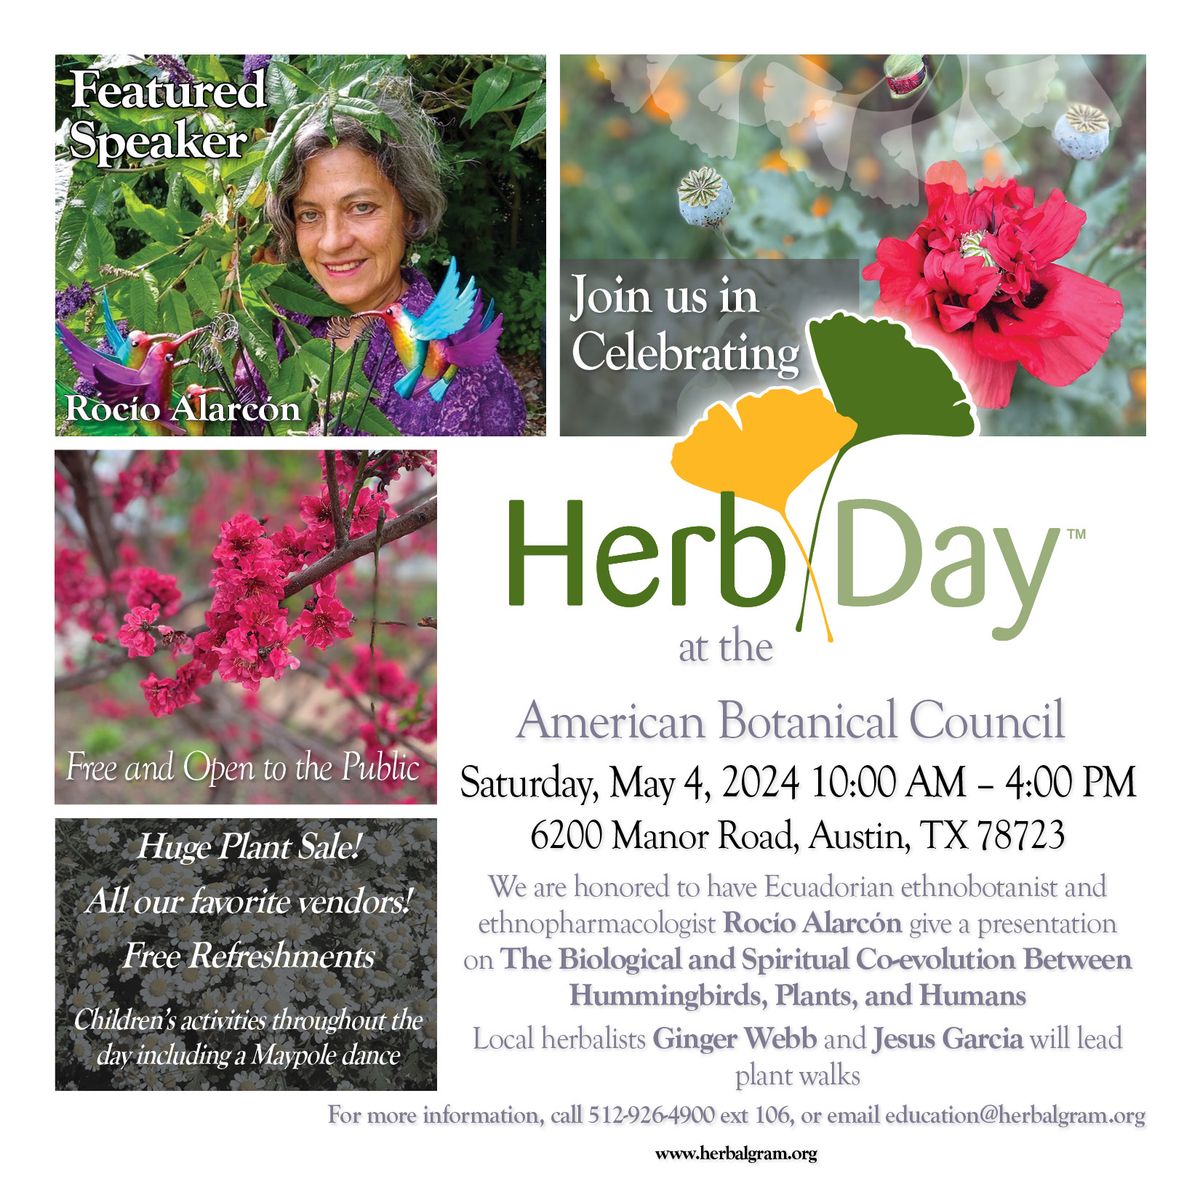 HerbDay at the American Botanical Council 